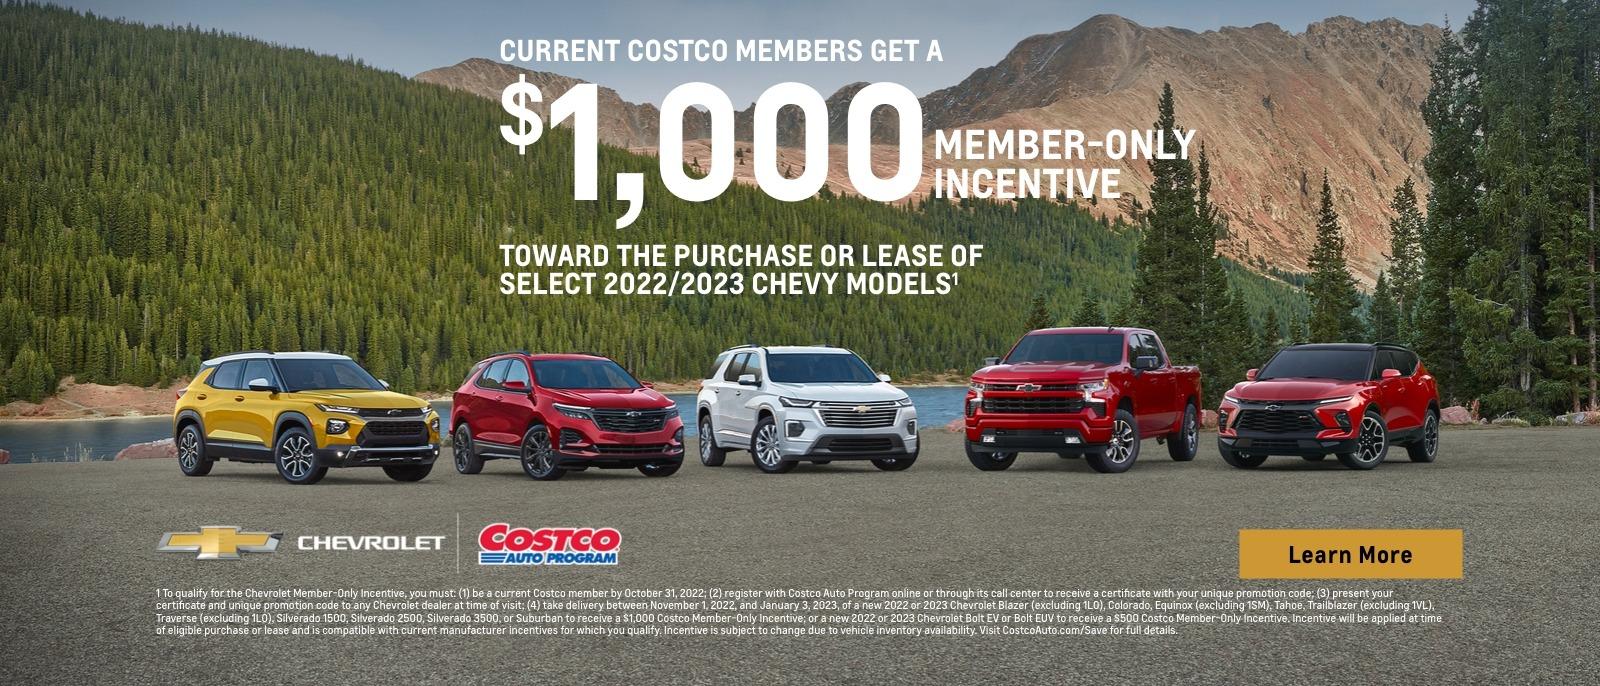 Current Costco members get a $1,000 member-only incentive toward the purchase or lease of select 2022/2023 Chevy models.